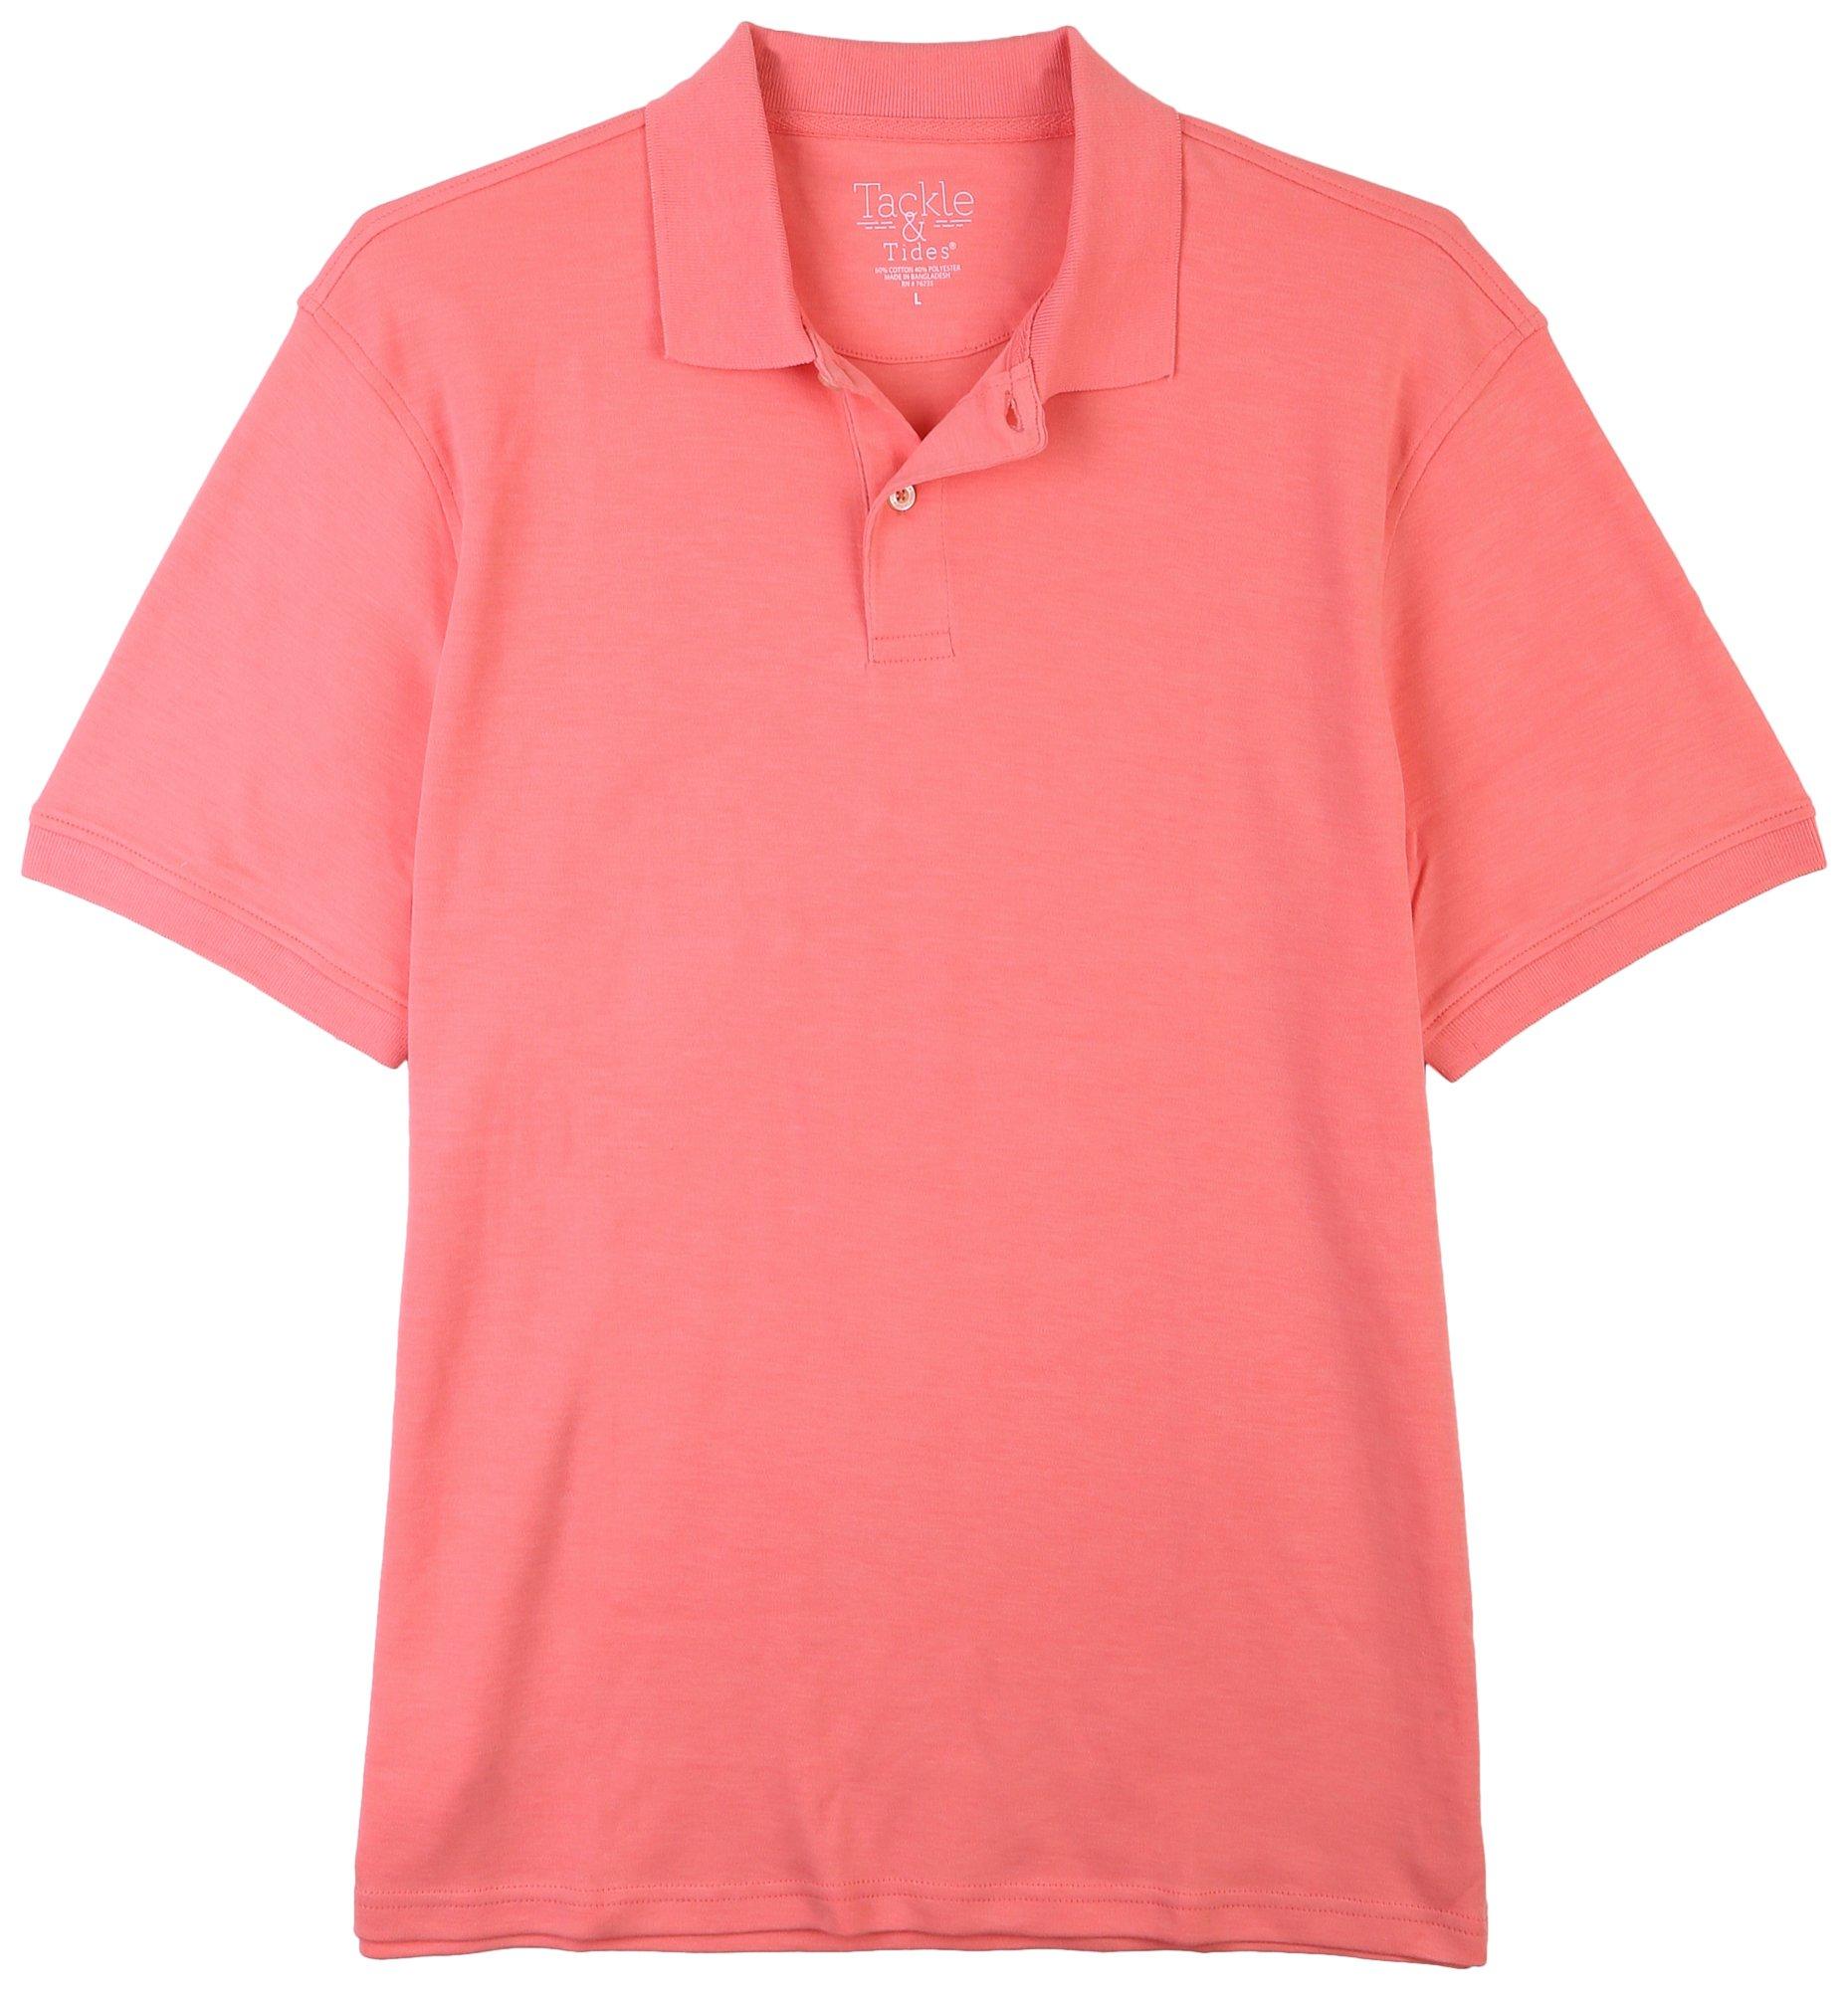 Tackle & Tides Mens Solid Short Sleeve Polo Top